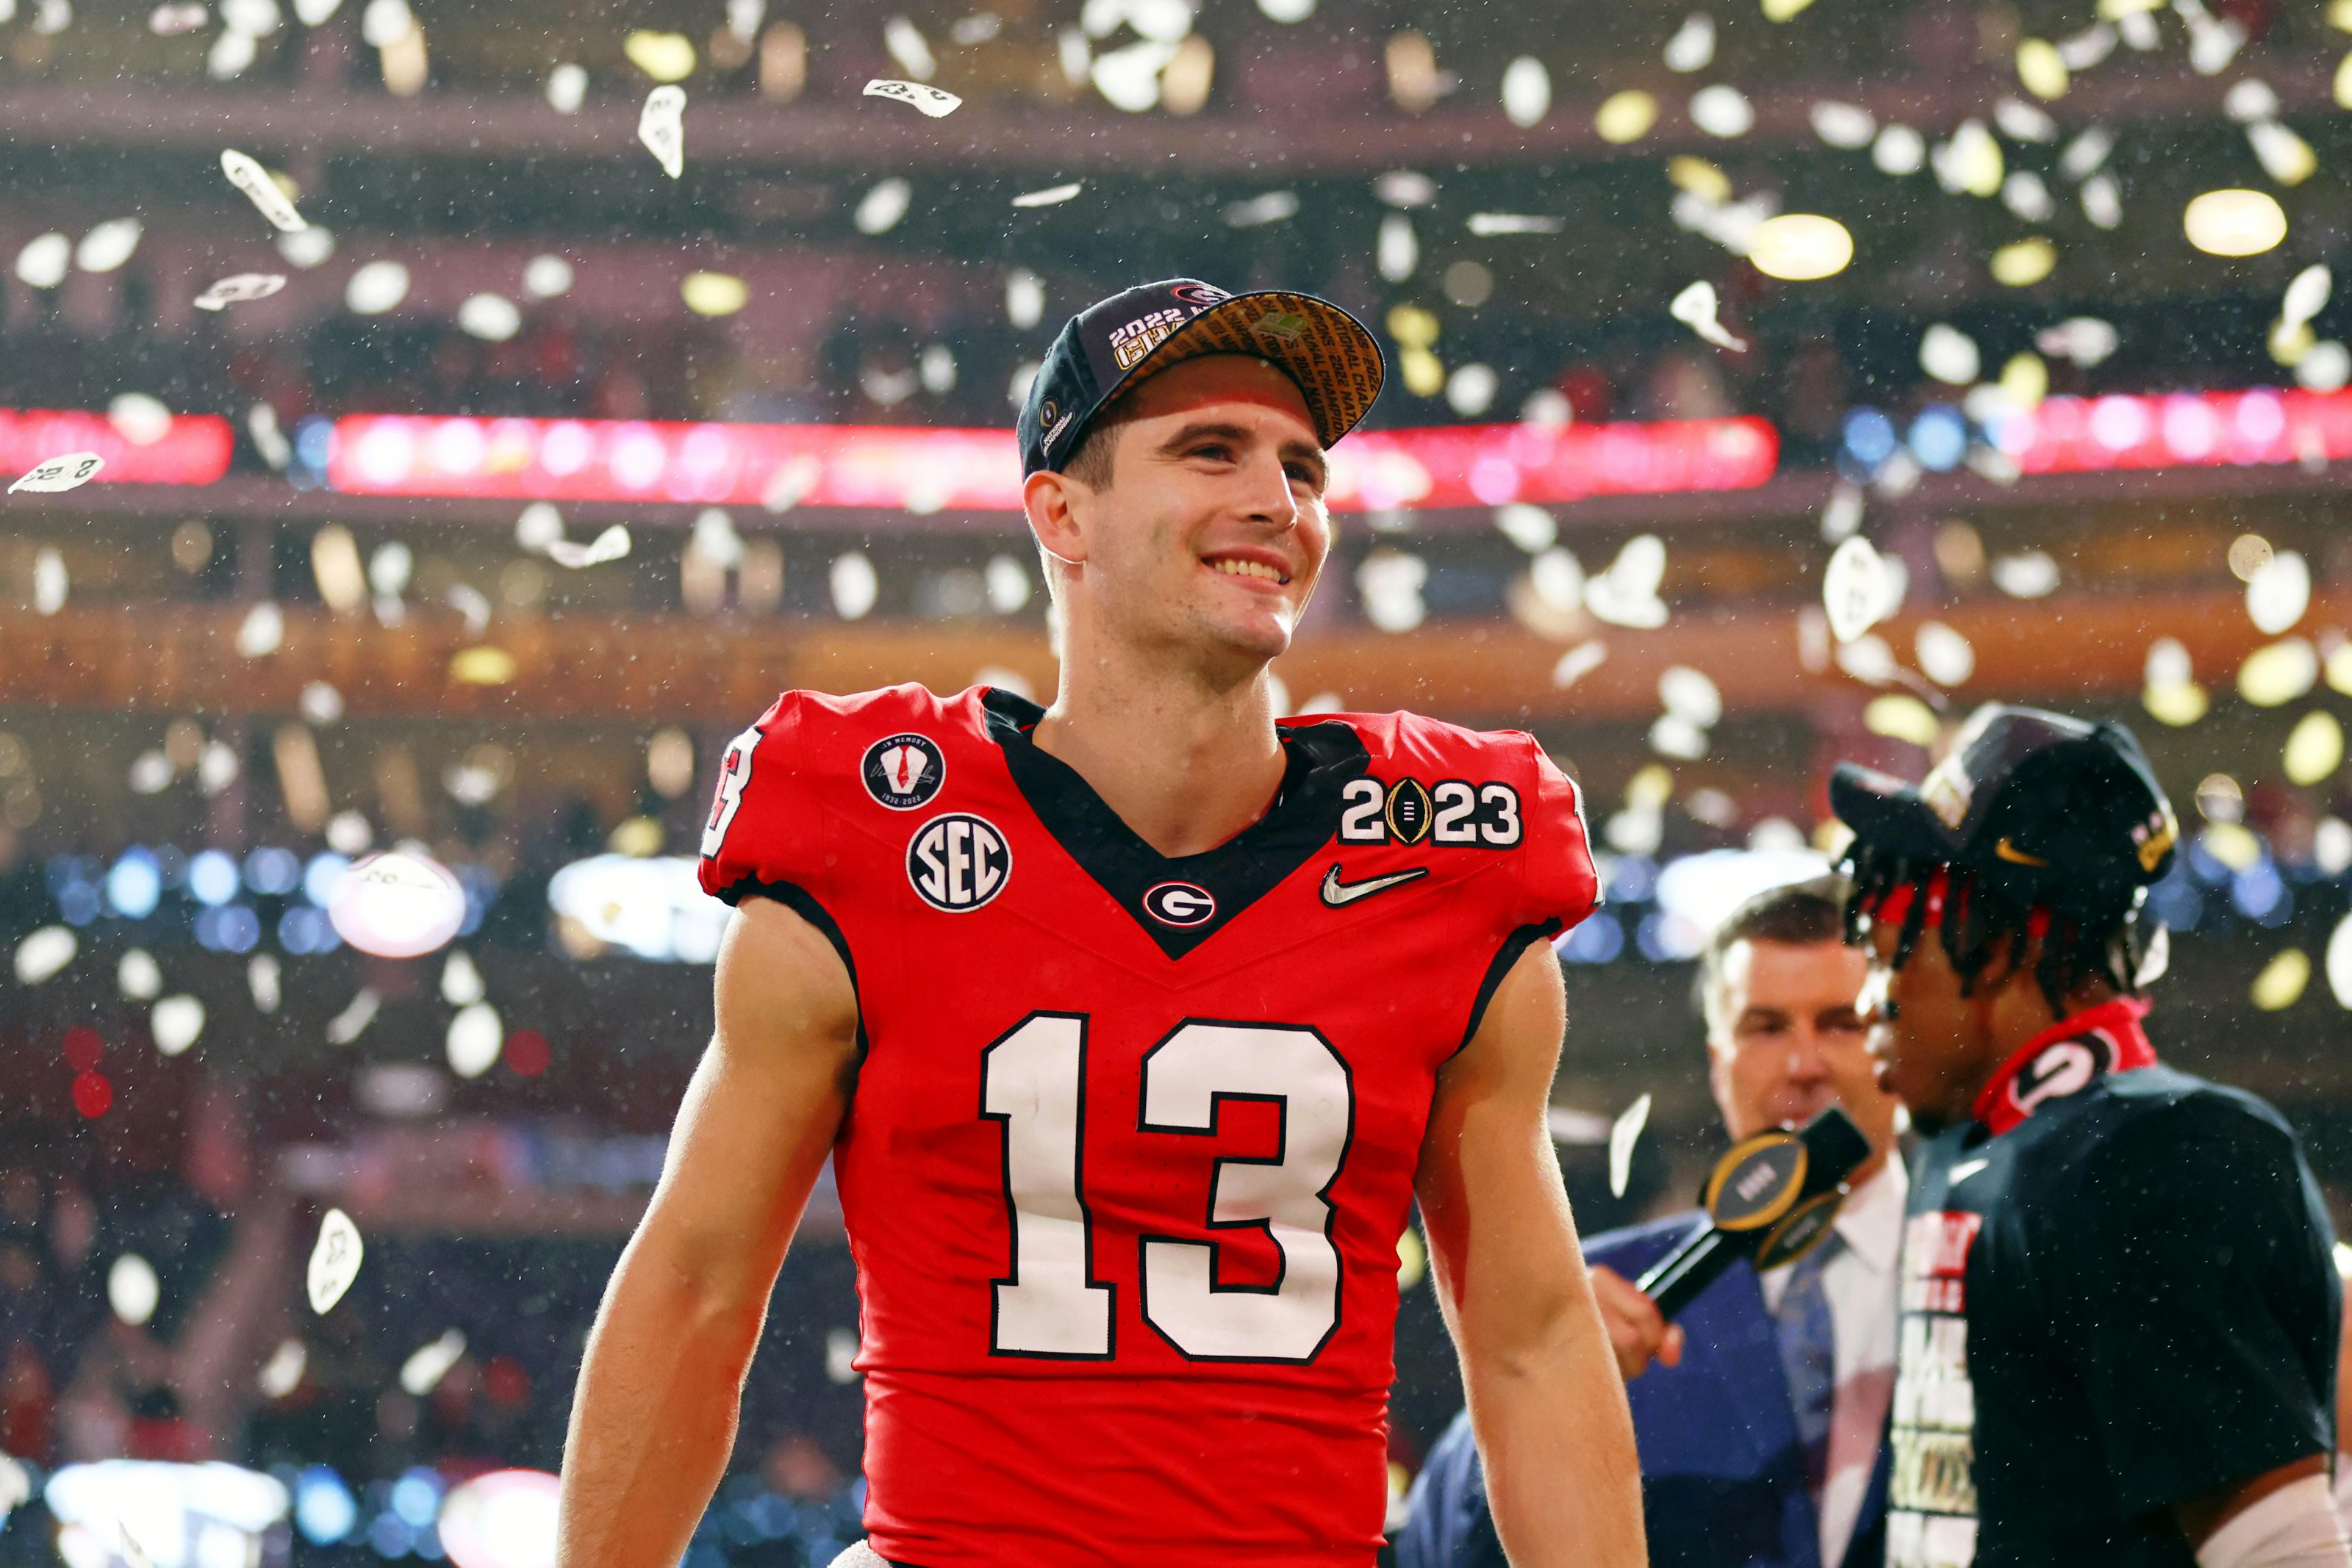 NFL Draft: 5 players who improved draft stock in CFP Championship Game